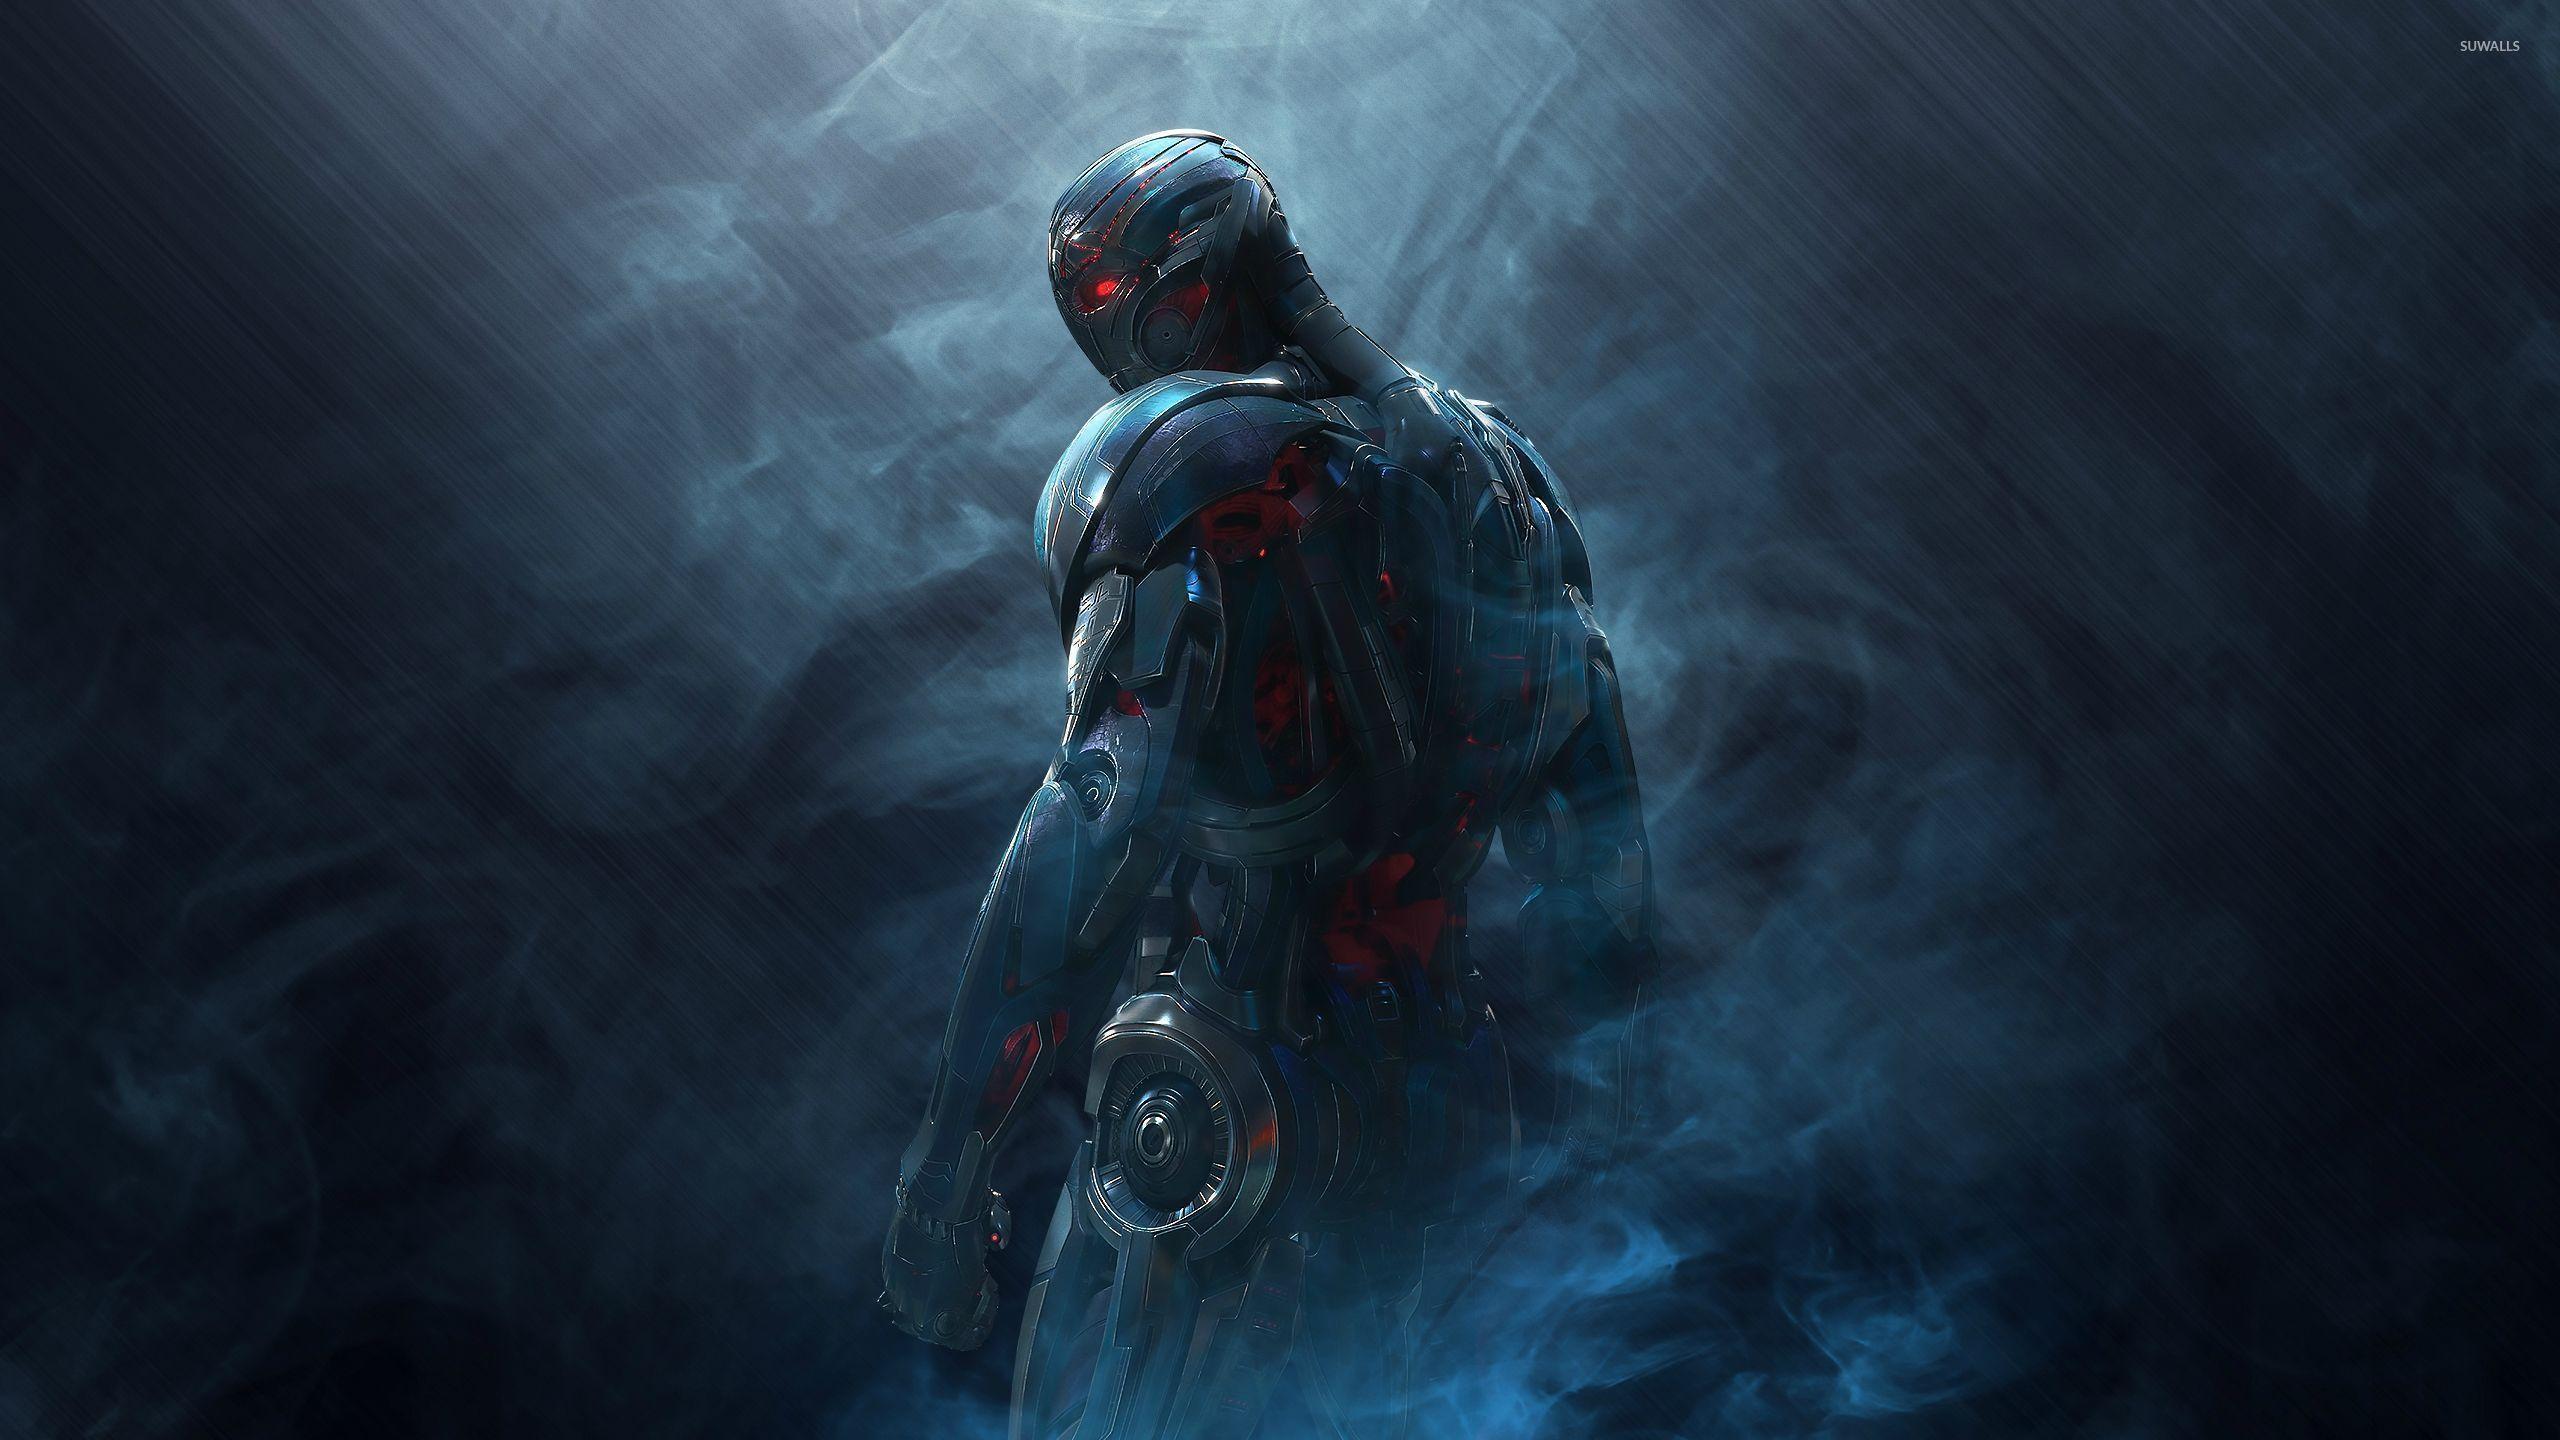 Nightmare Ultron in Avengers: Age of Ultron wallpapers